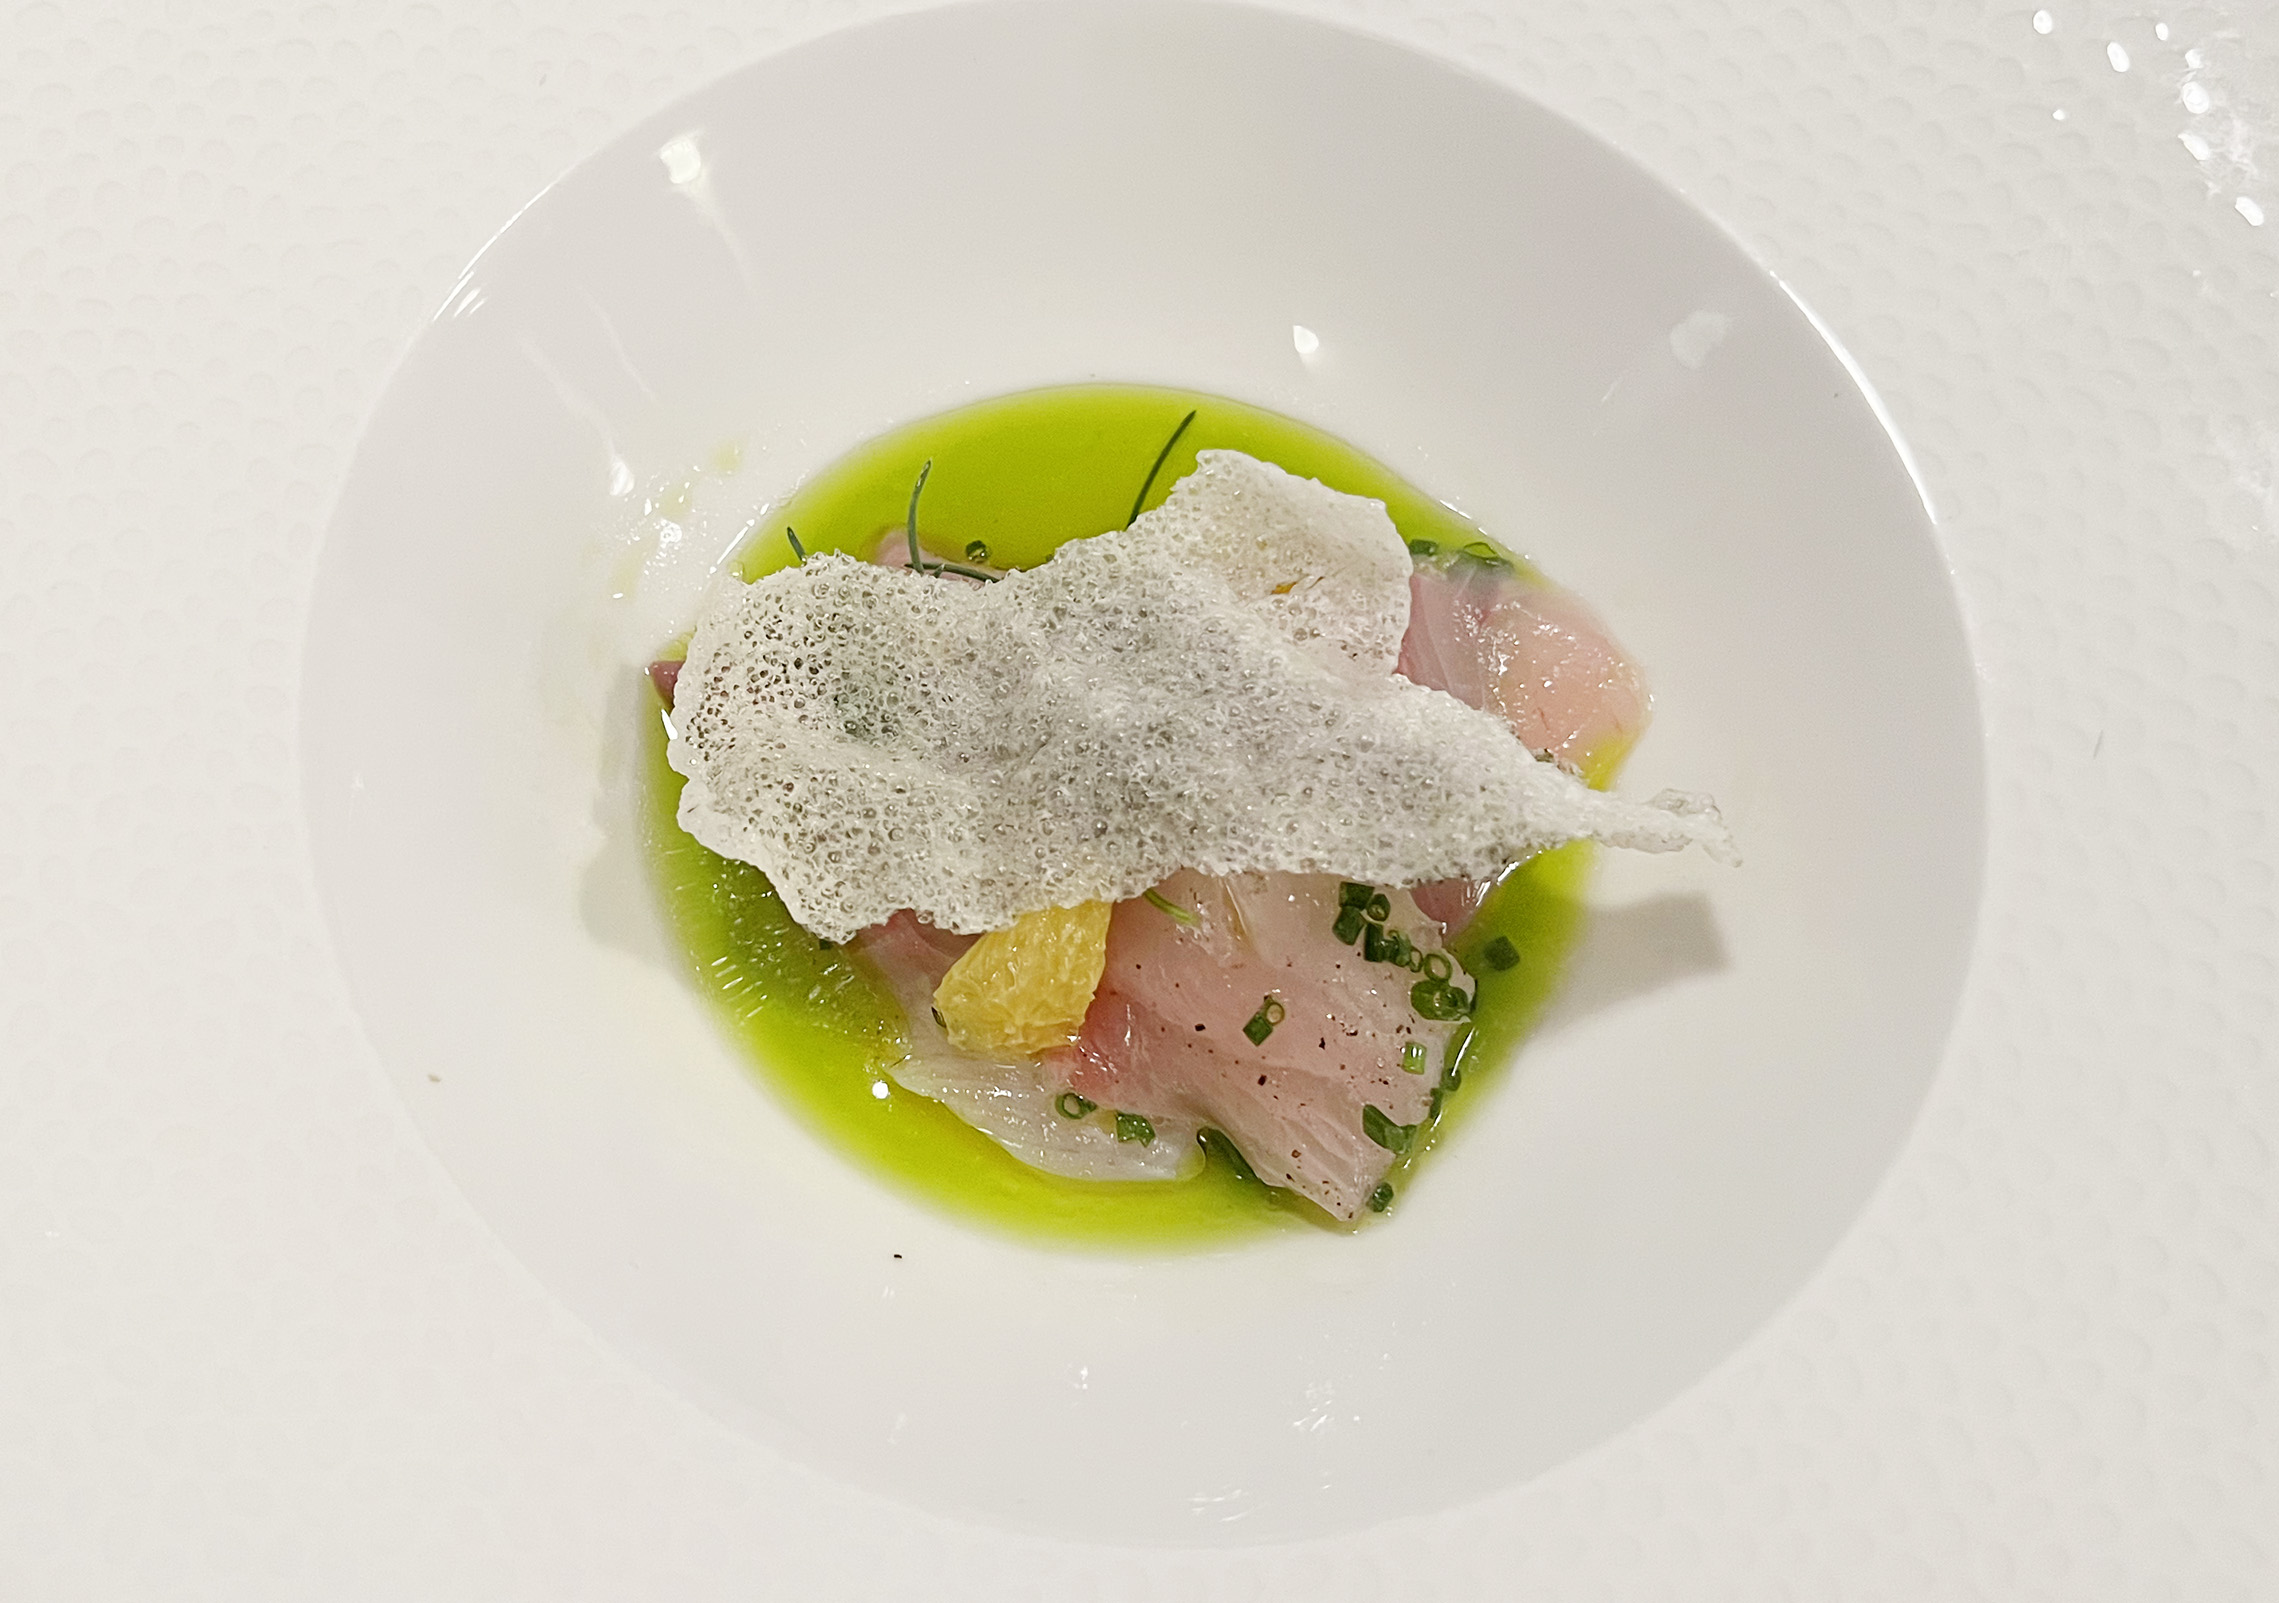 Yellowtail Crudo, a citrusy delight featuring seagrass, rice cracker, and sea grapes, paired with Kuro Kabuto, Muroka, Junmai Daiginjo at Kali Restaurant in Los Angeles (Photo by Julie Nguyen)